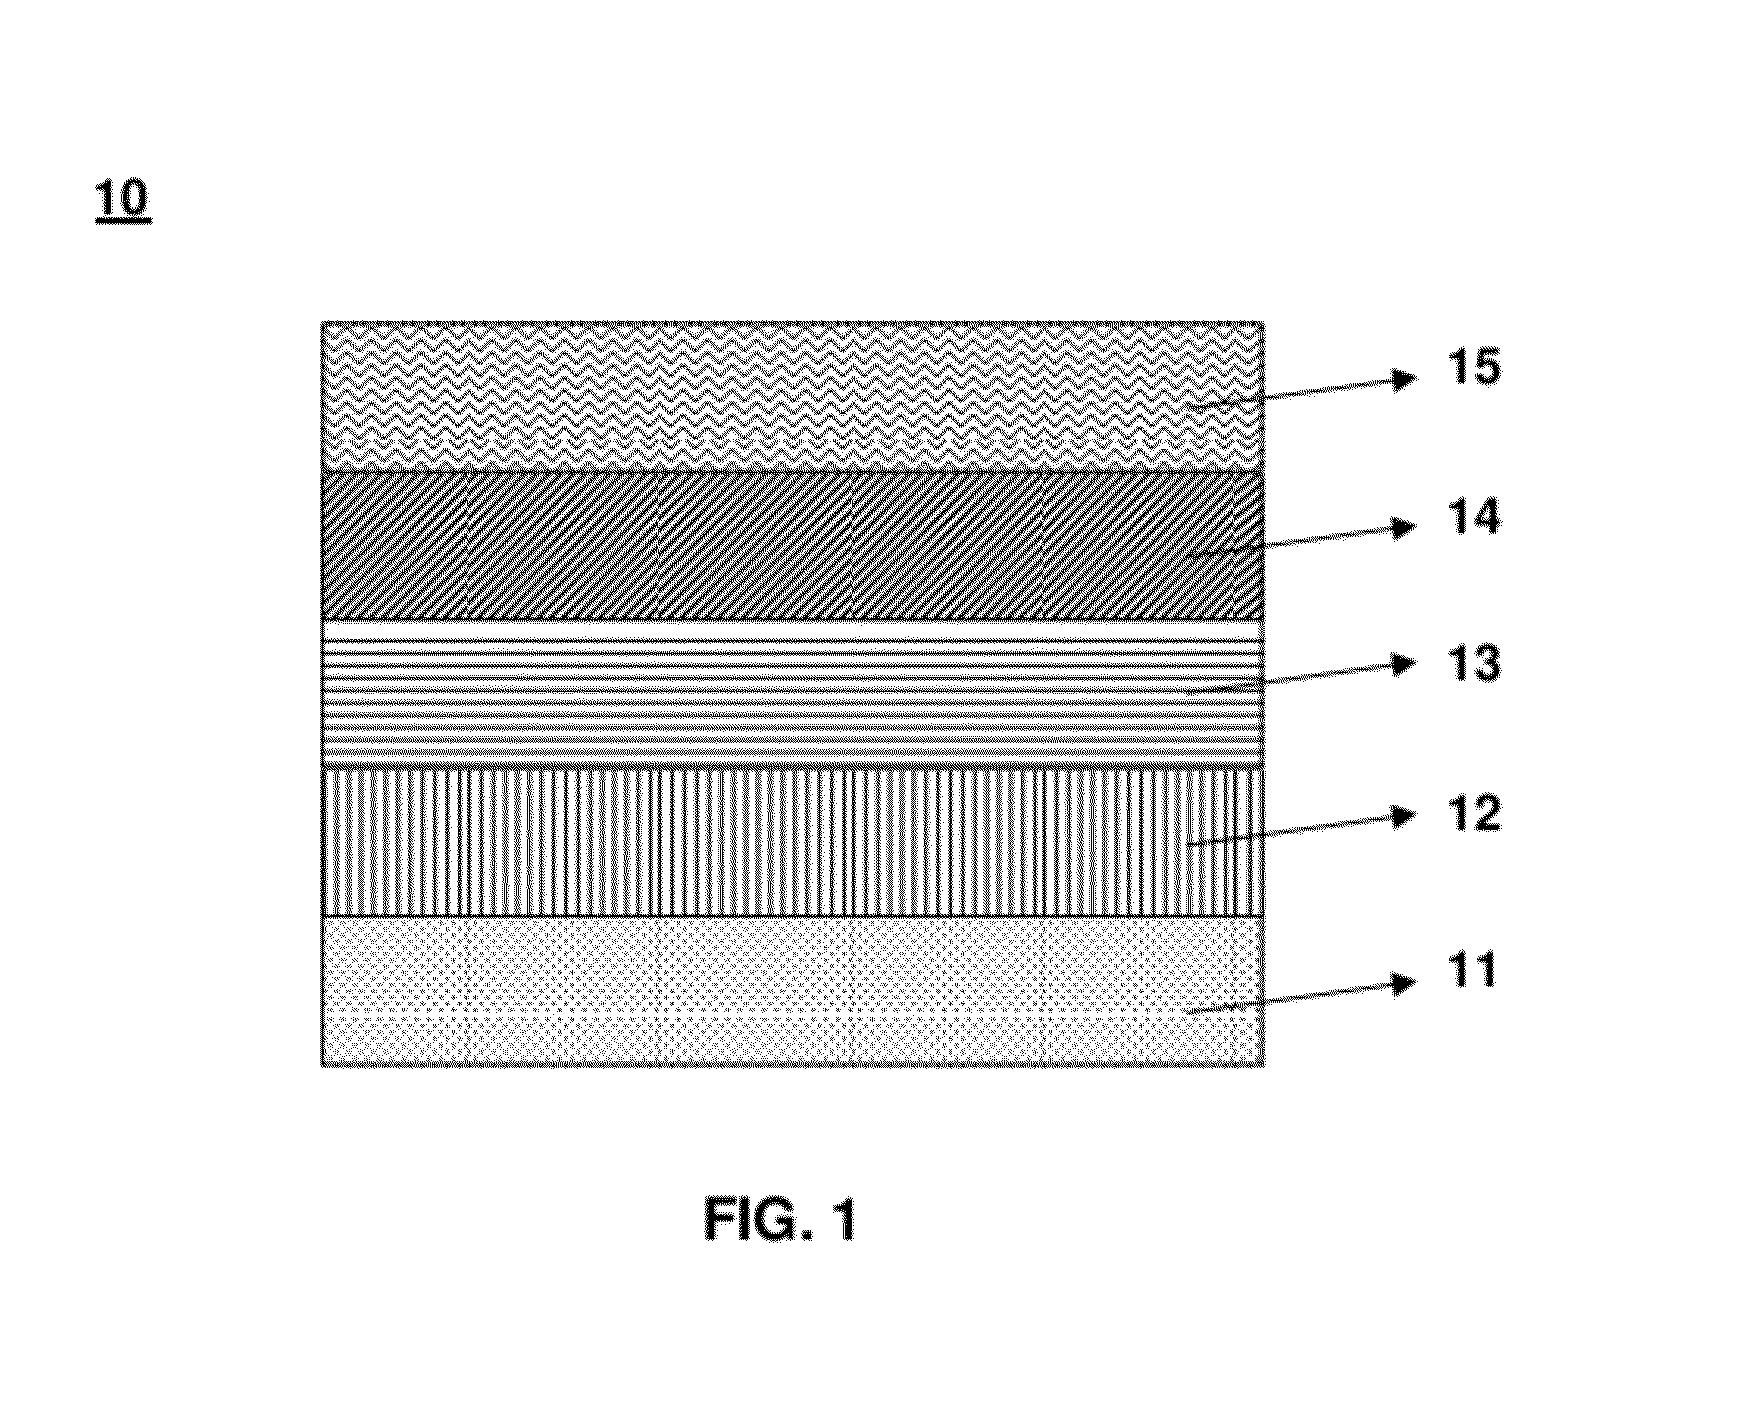 Analyte Sensors Having Temperature Independent Membranes